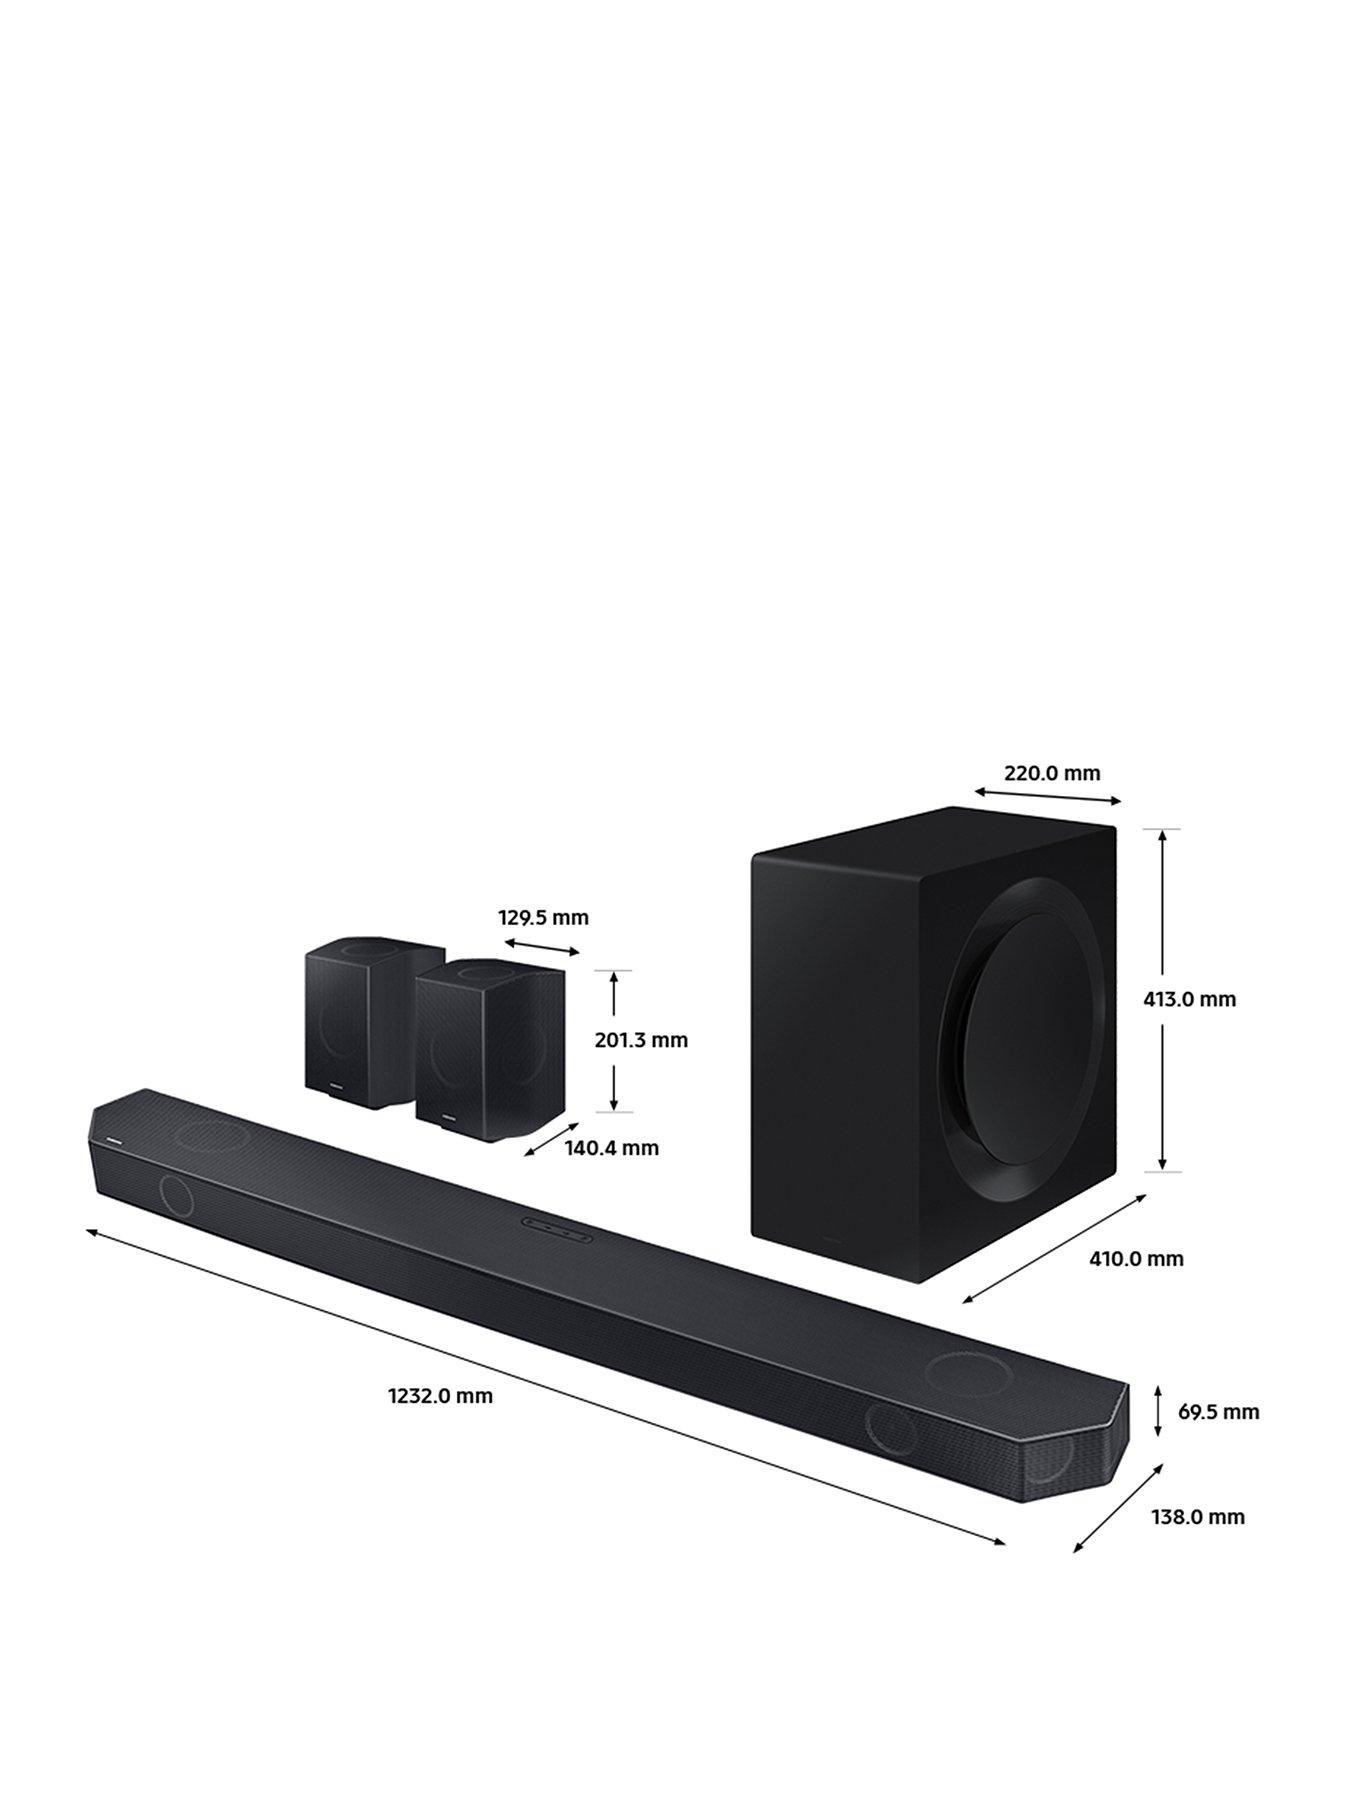 How to use Dolby Atmos with your Samsung Soundbar